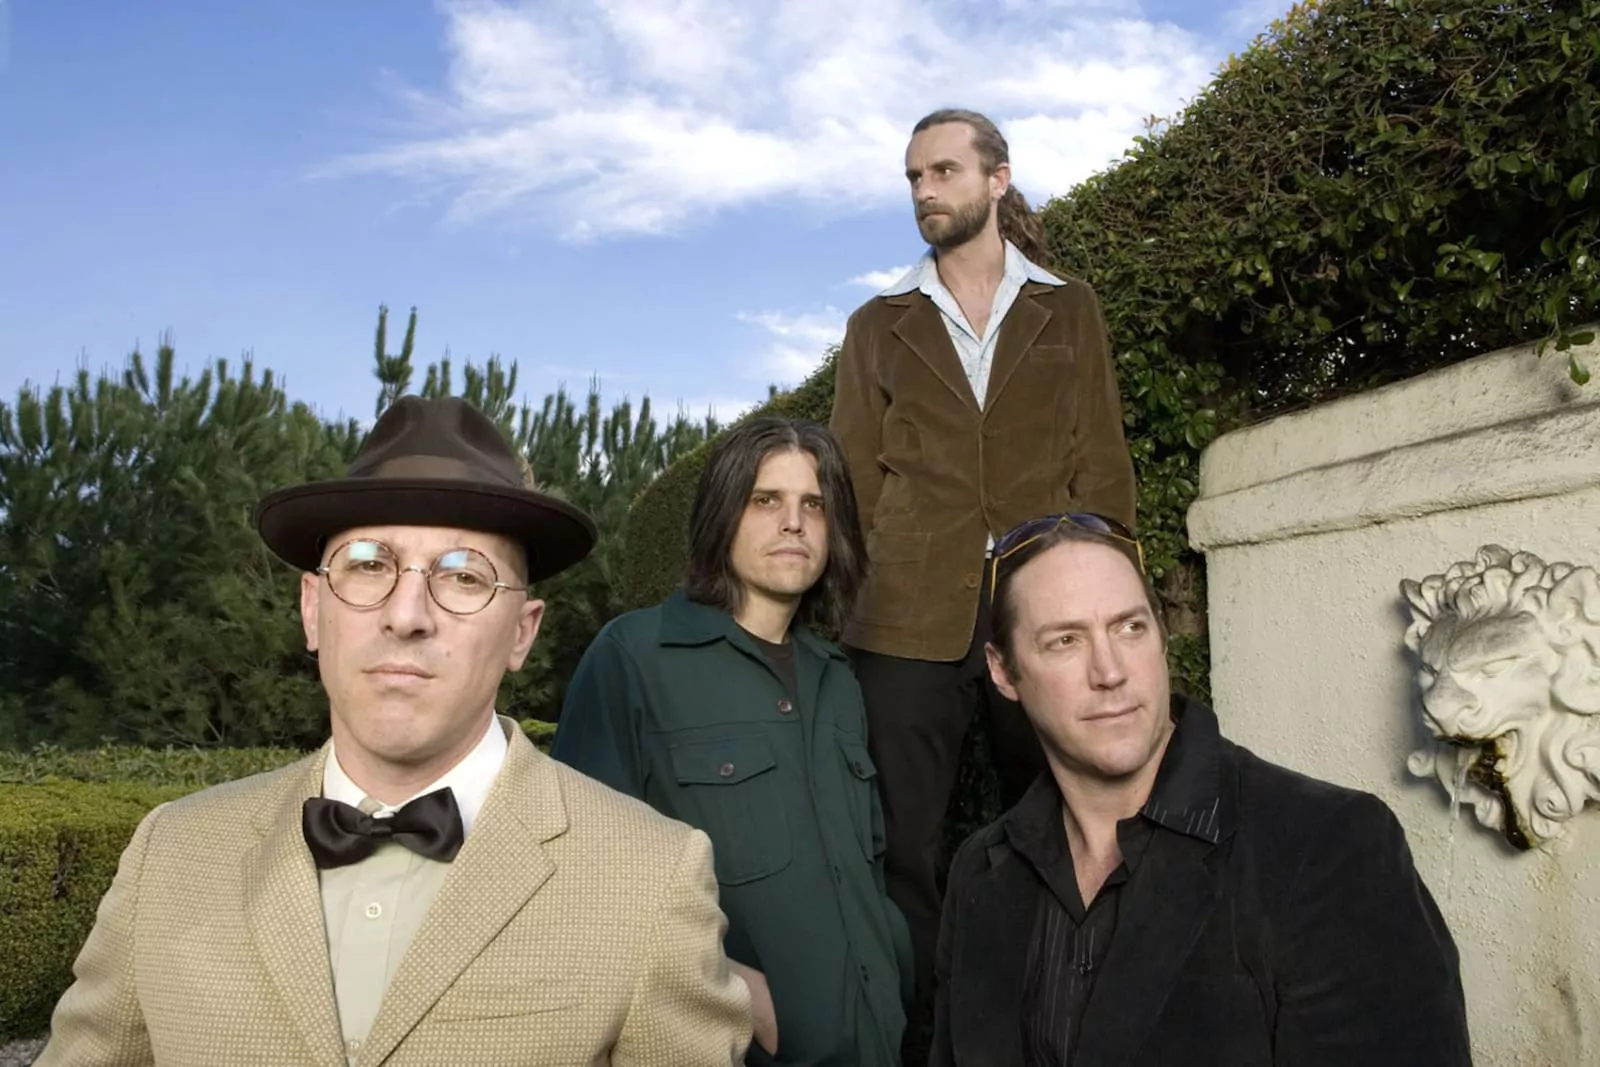 How to Buy Cheap Tickets to Tool's 2023 Tour Dates?